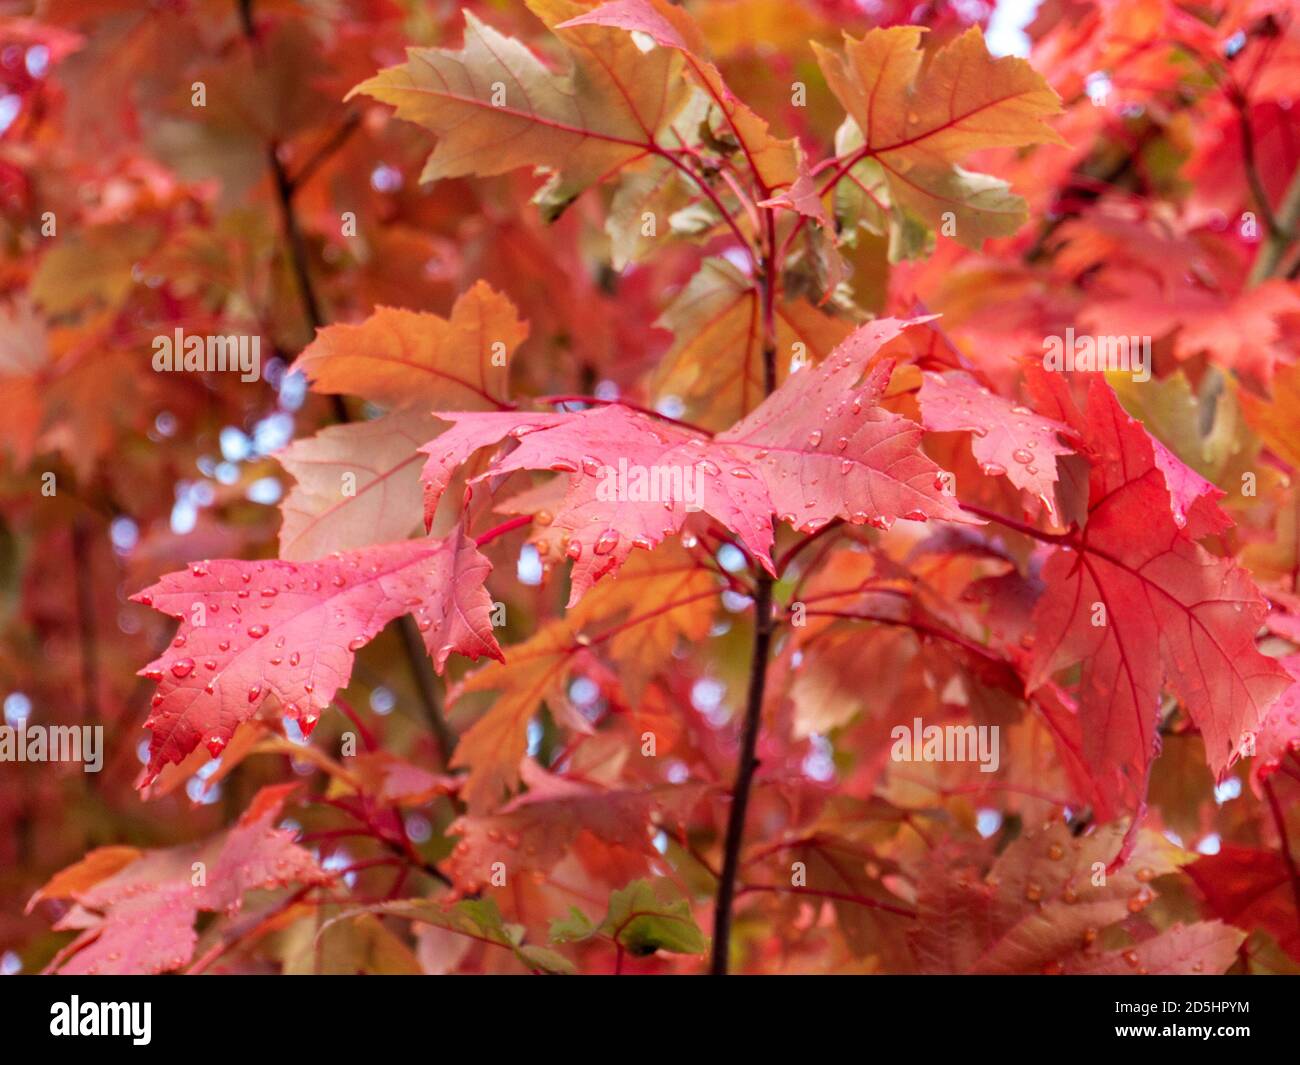 Red maple branch. Autumn colored leaves with rain drops. Fall season. Stock Photo